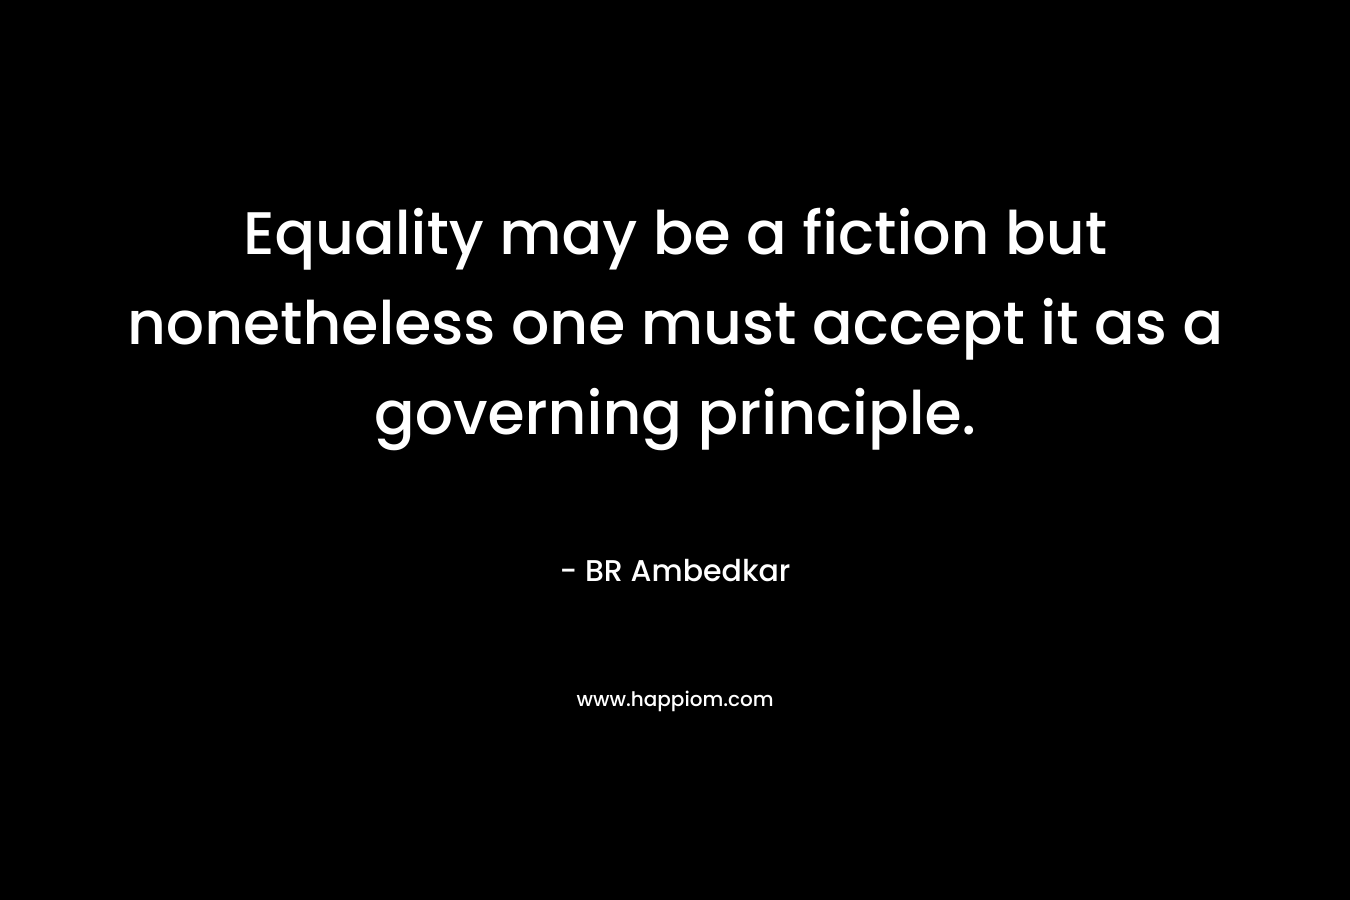 Equality may be a fiction but nonetheless one must accept it as a governing principle. – BR Ambedkar